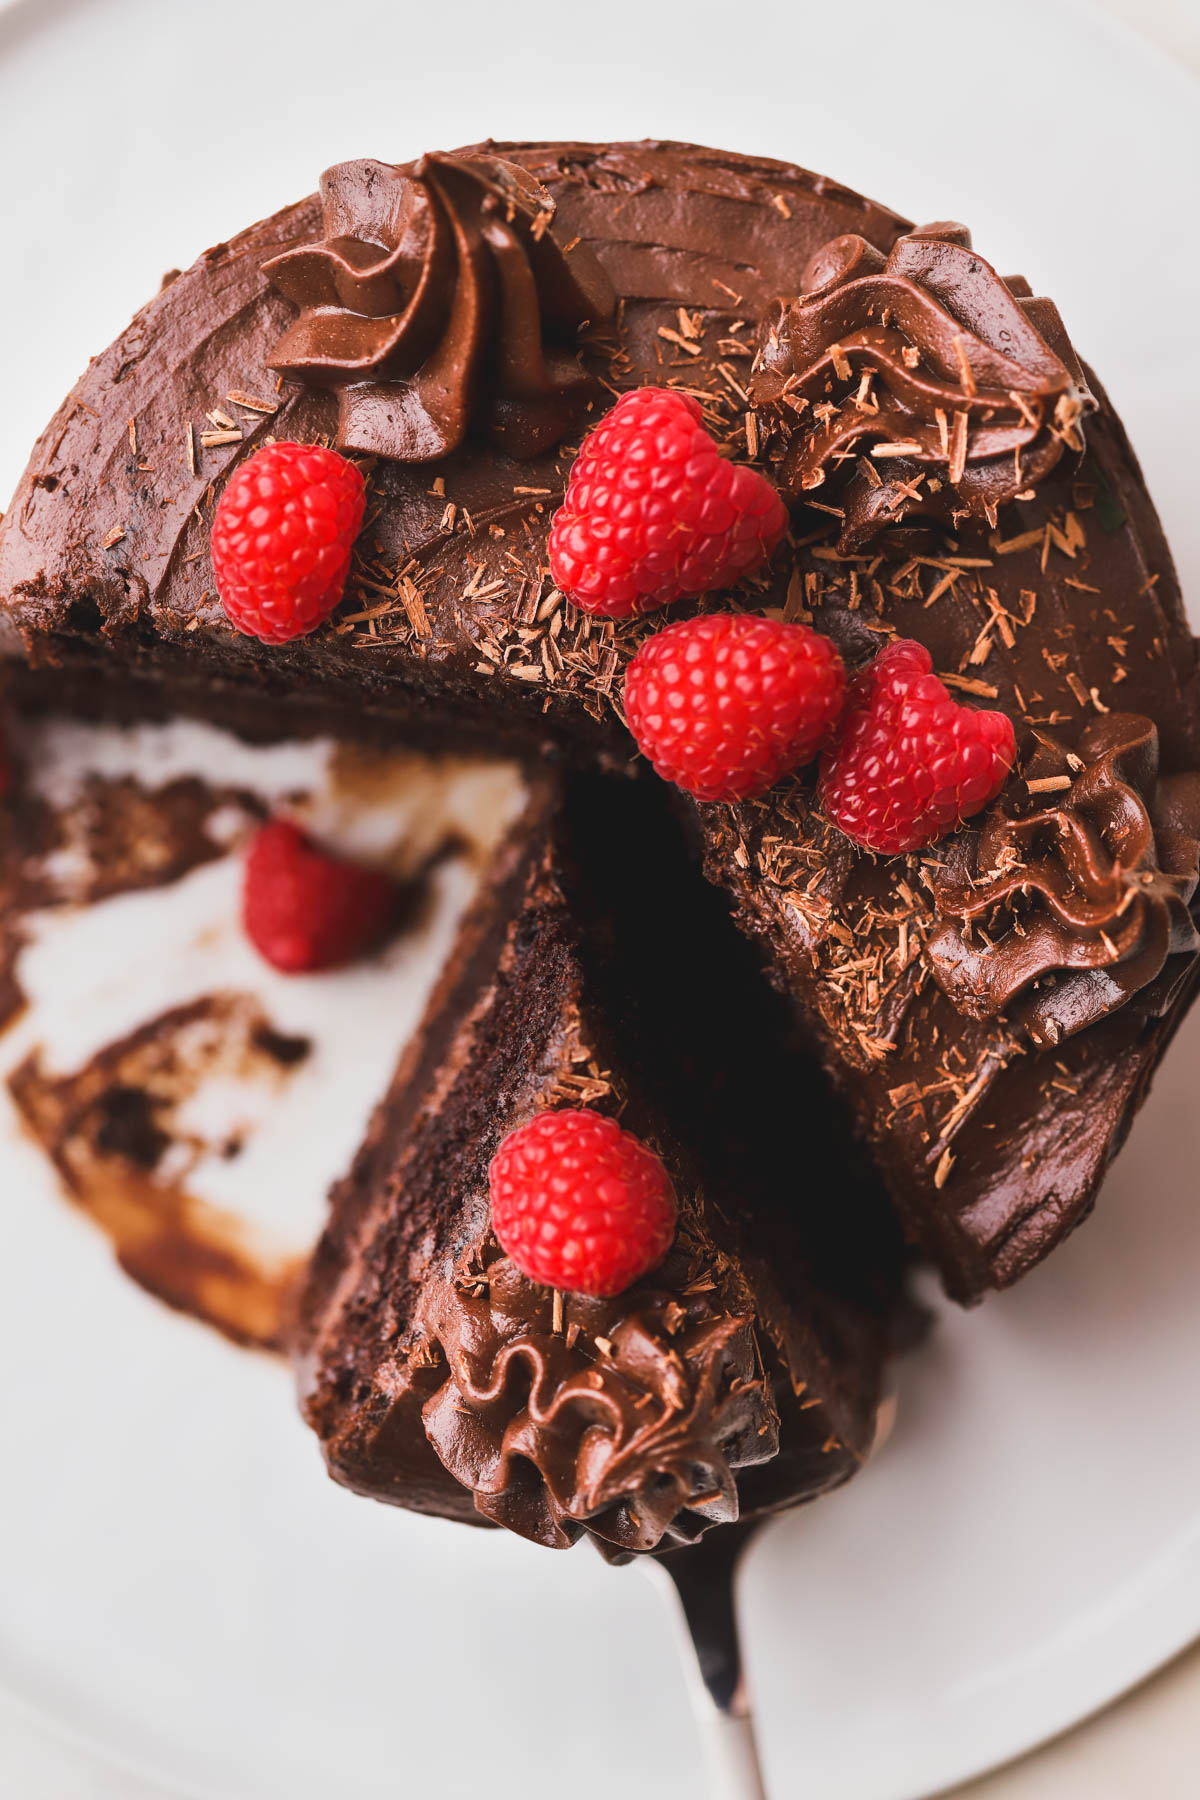 Top view of chocolate cake with chocolate frosting, shaved chocolate and fresh raspberries.  